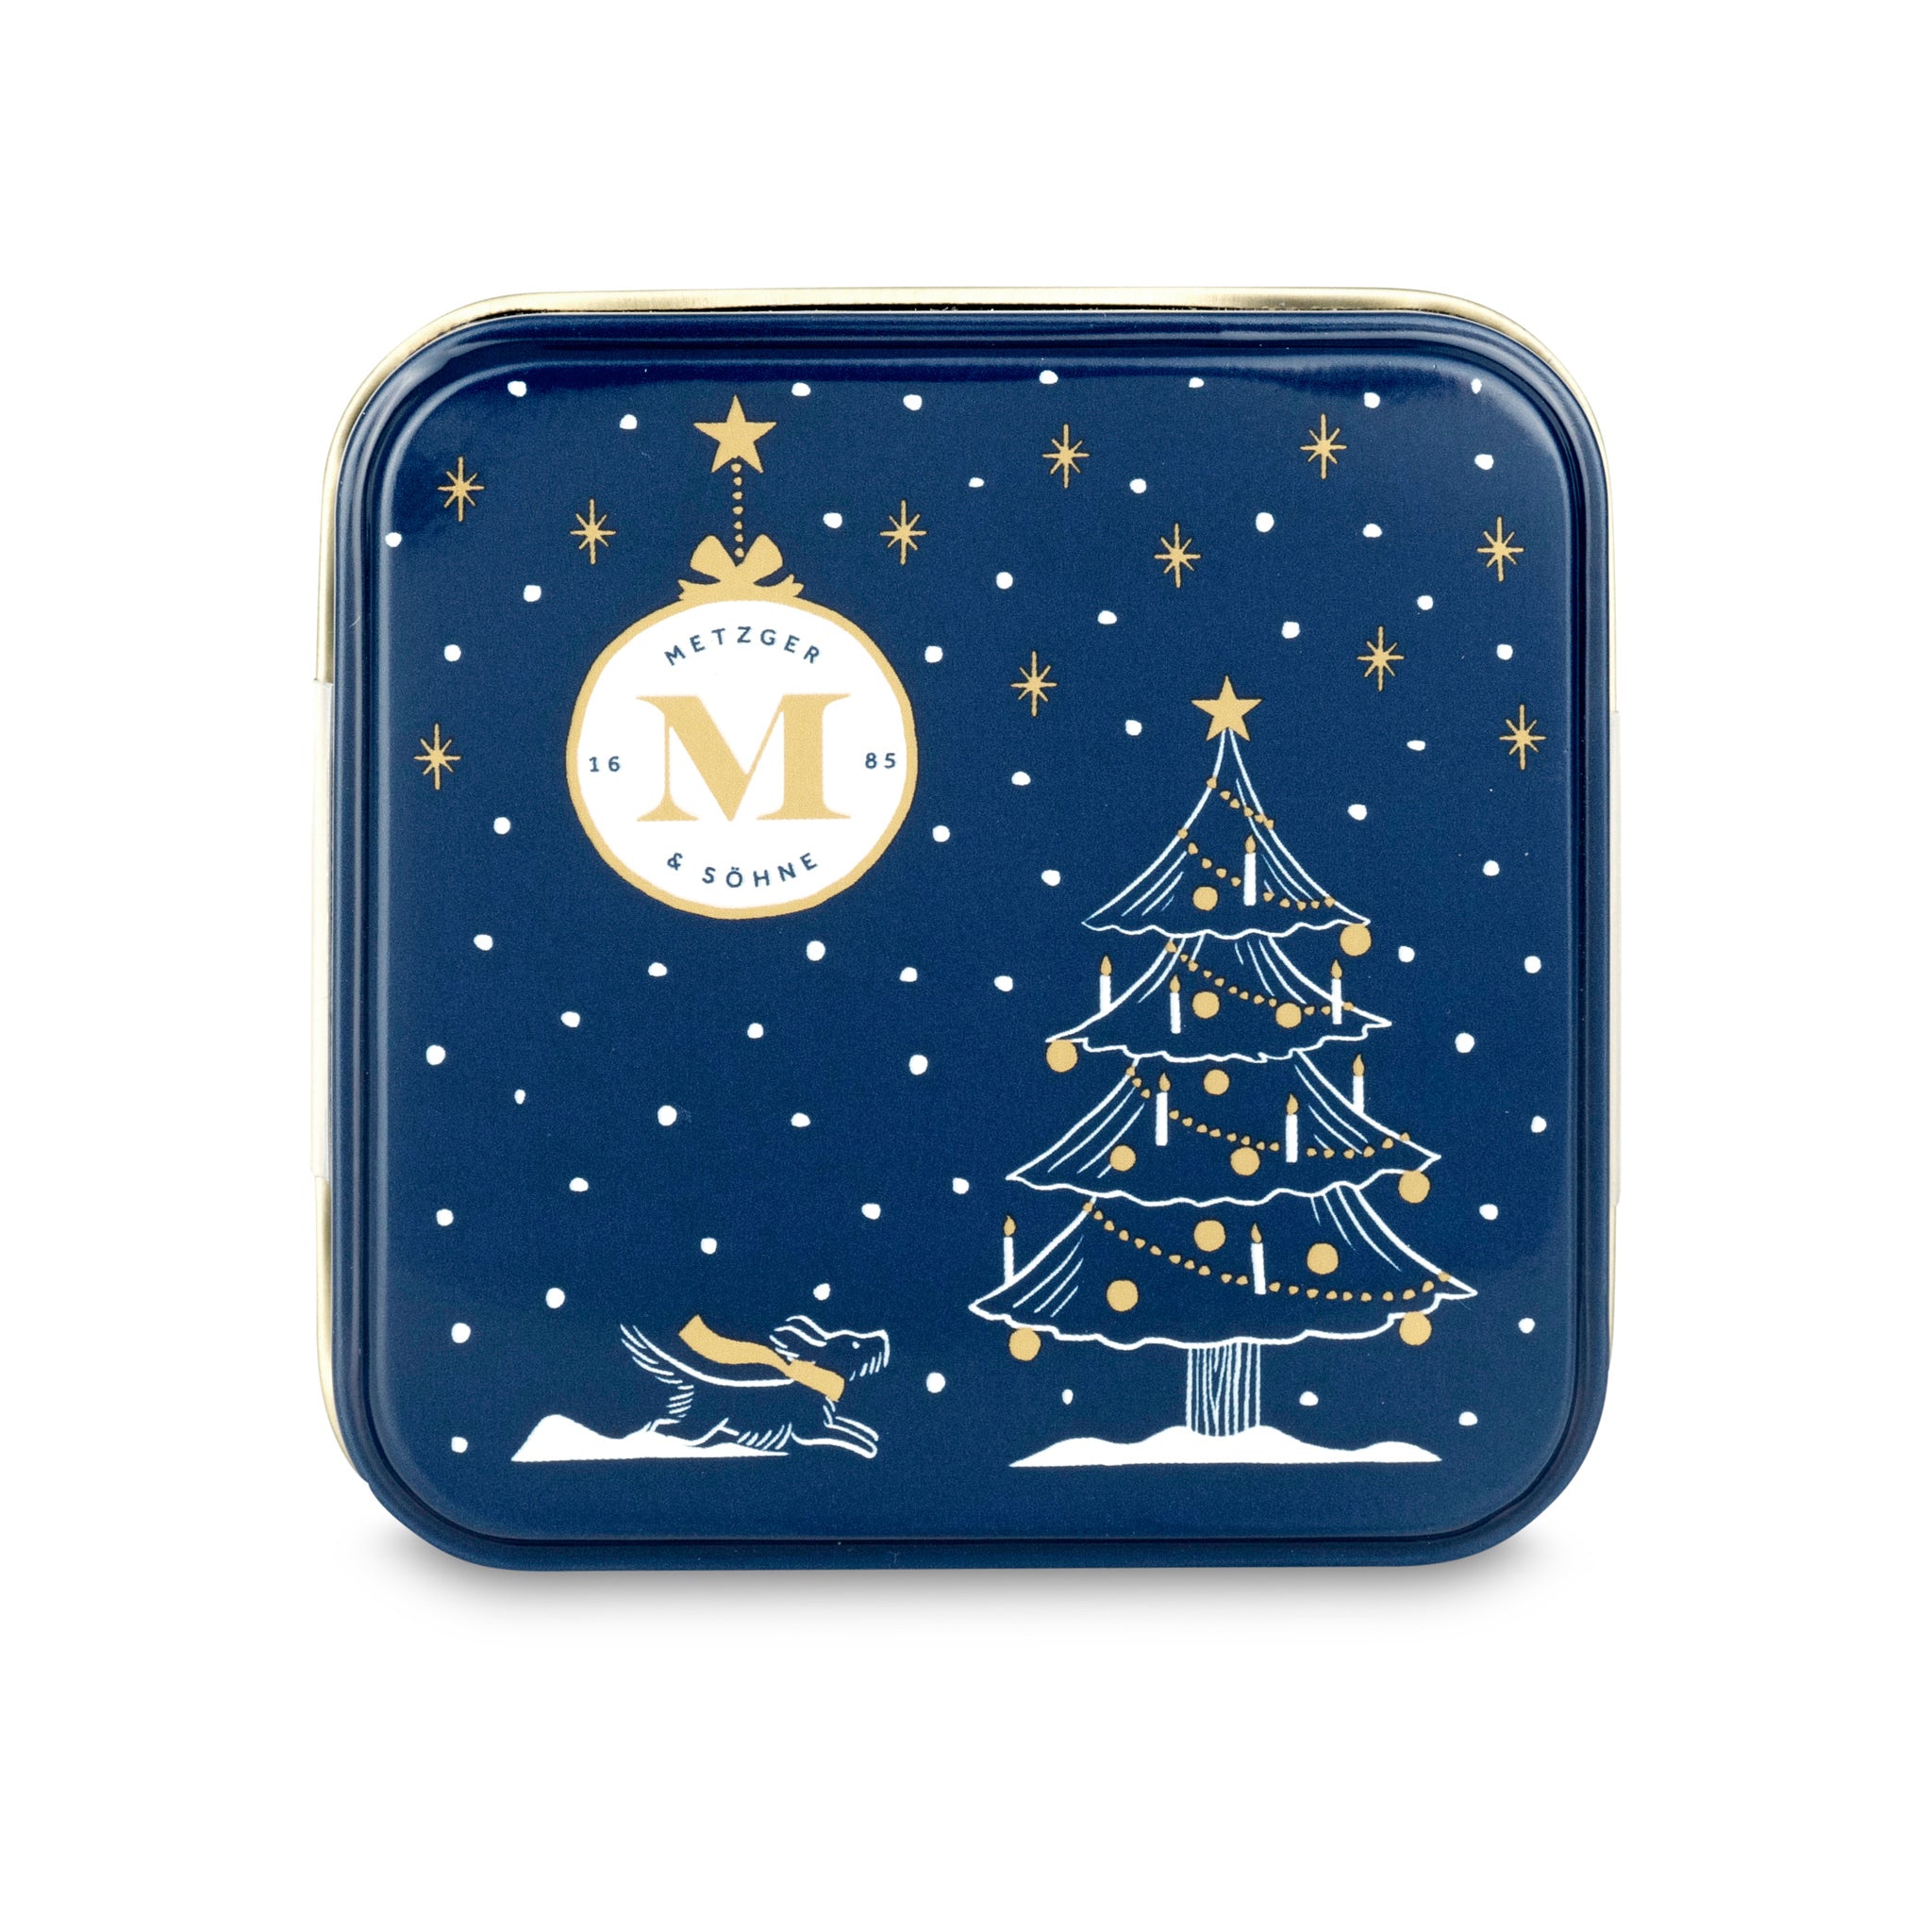 Adorable Lebkuchen 'honey cake' Christmas tin in navy filled with 4 different Lebkuchen pralines.